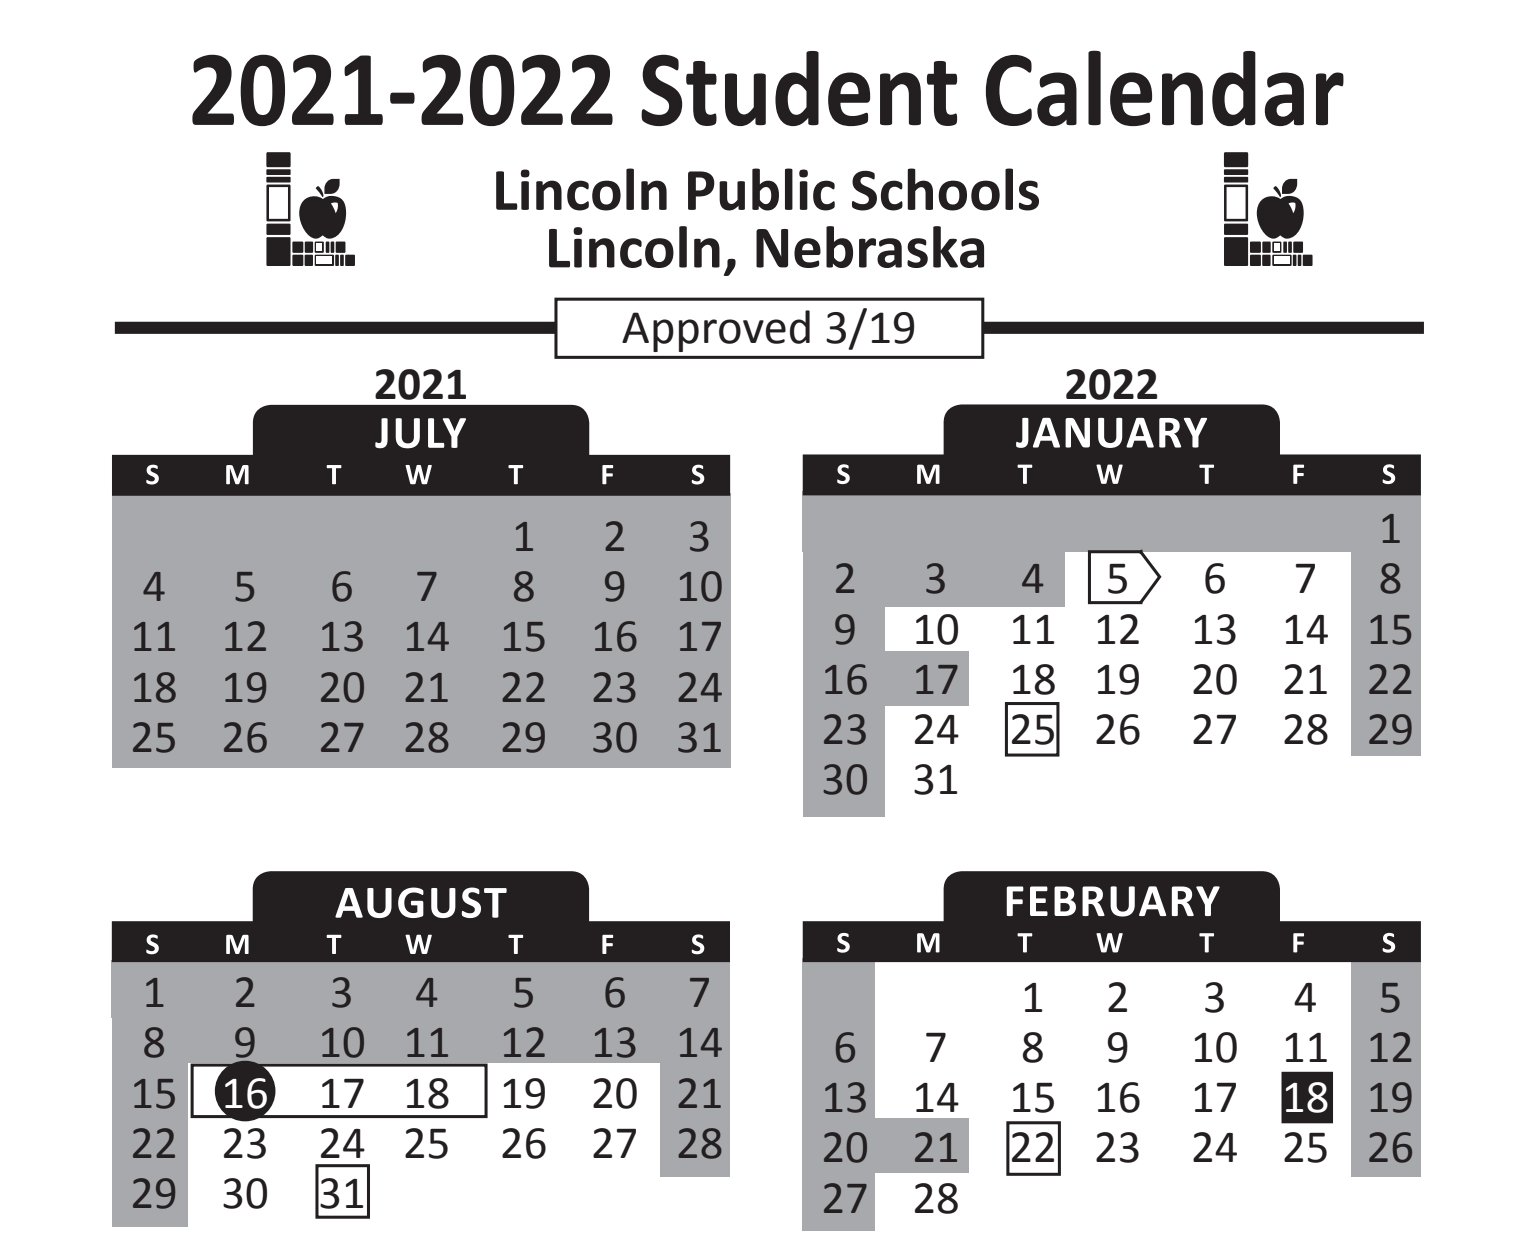 Lps 2022 Calendar North Star Hs On Twitter: "Gators! Check Out The Student Calendar For The  2021-2022 School Year. Https://T.co/Fjwl0Asxgt You Can Access The Entire  Folder Of Back To School Resources Here: Https://T.co/N64Bzmsbrs  Https://T.co/Sje8Aphani" /